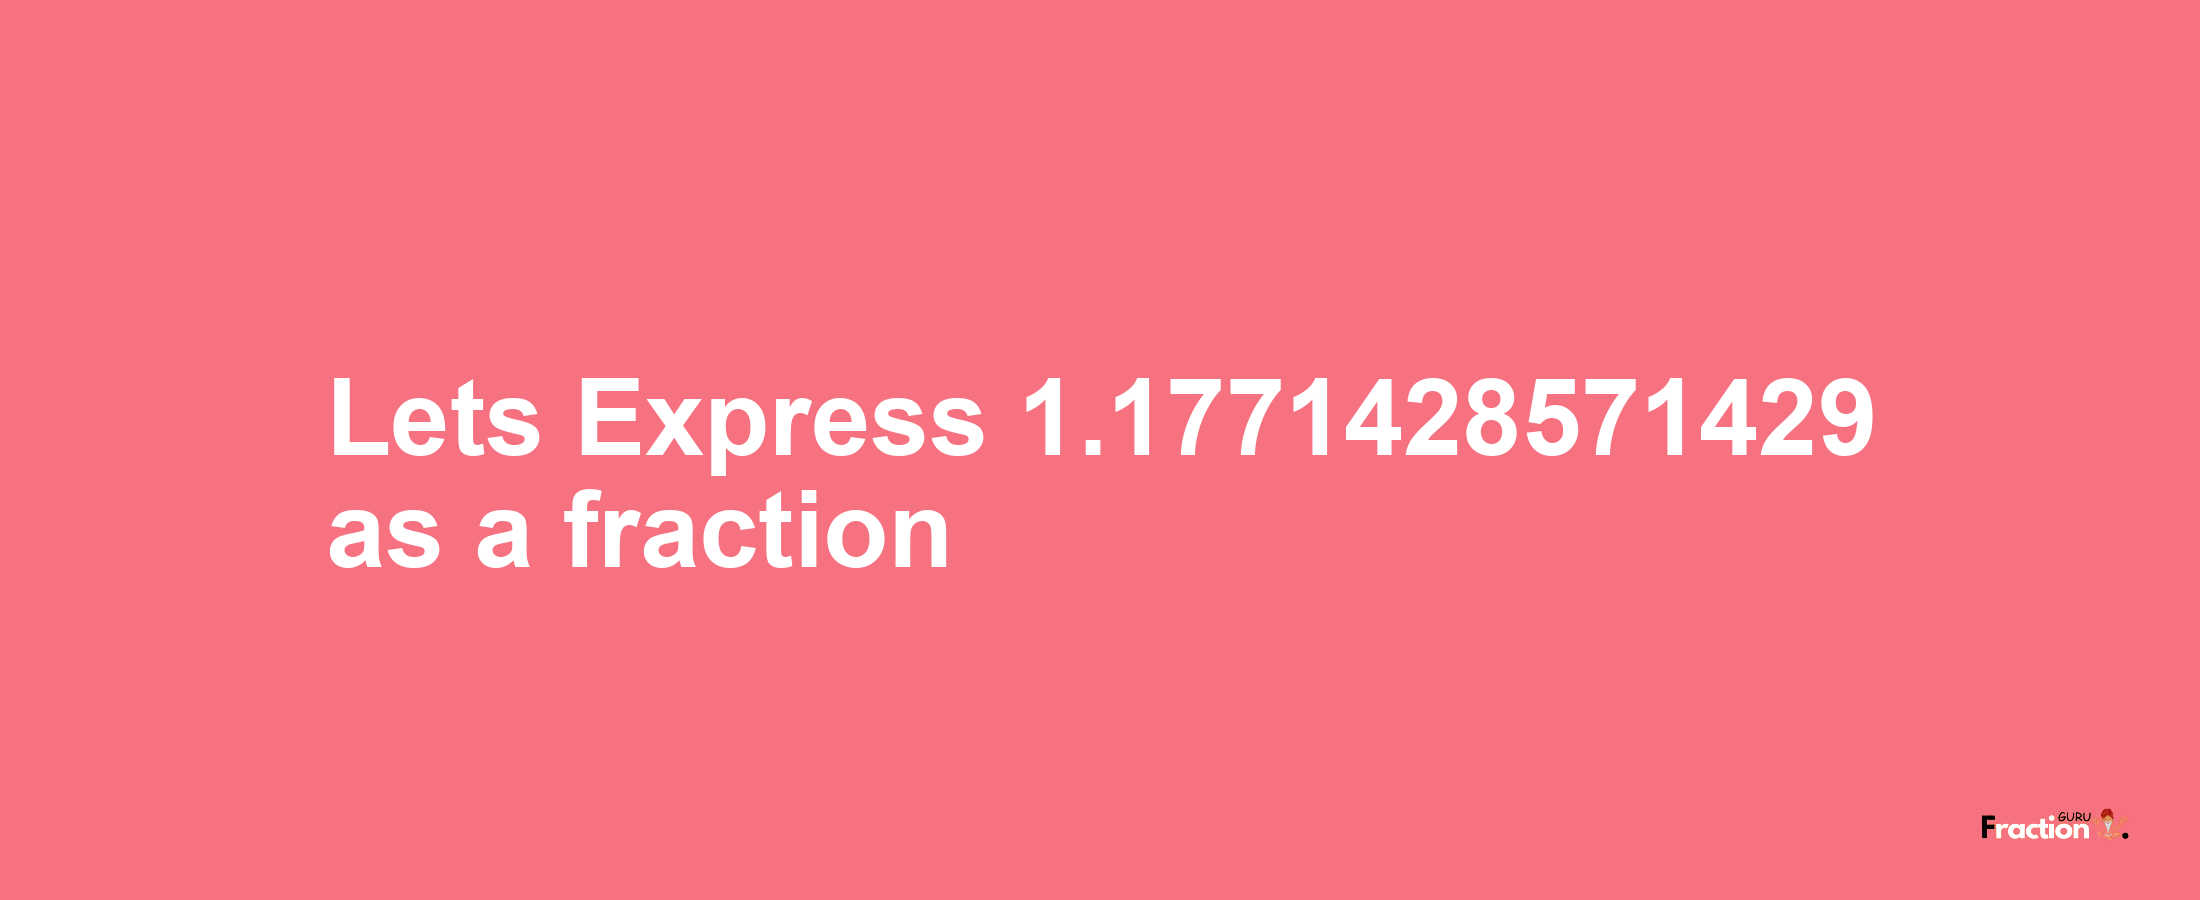 Lets Express 1.1771428571429 as afraction